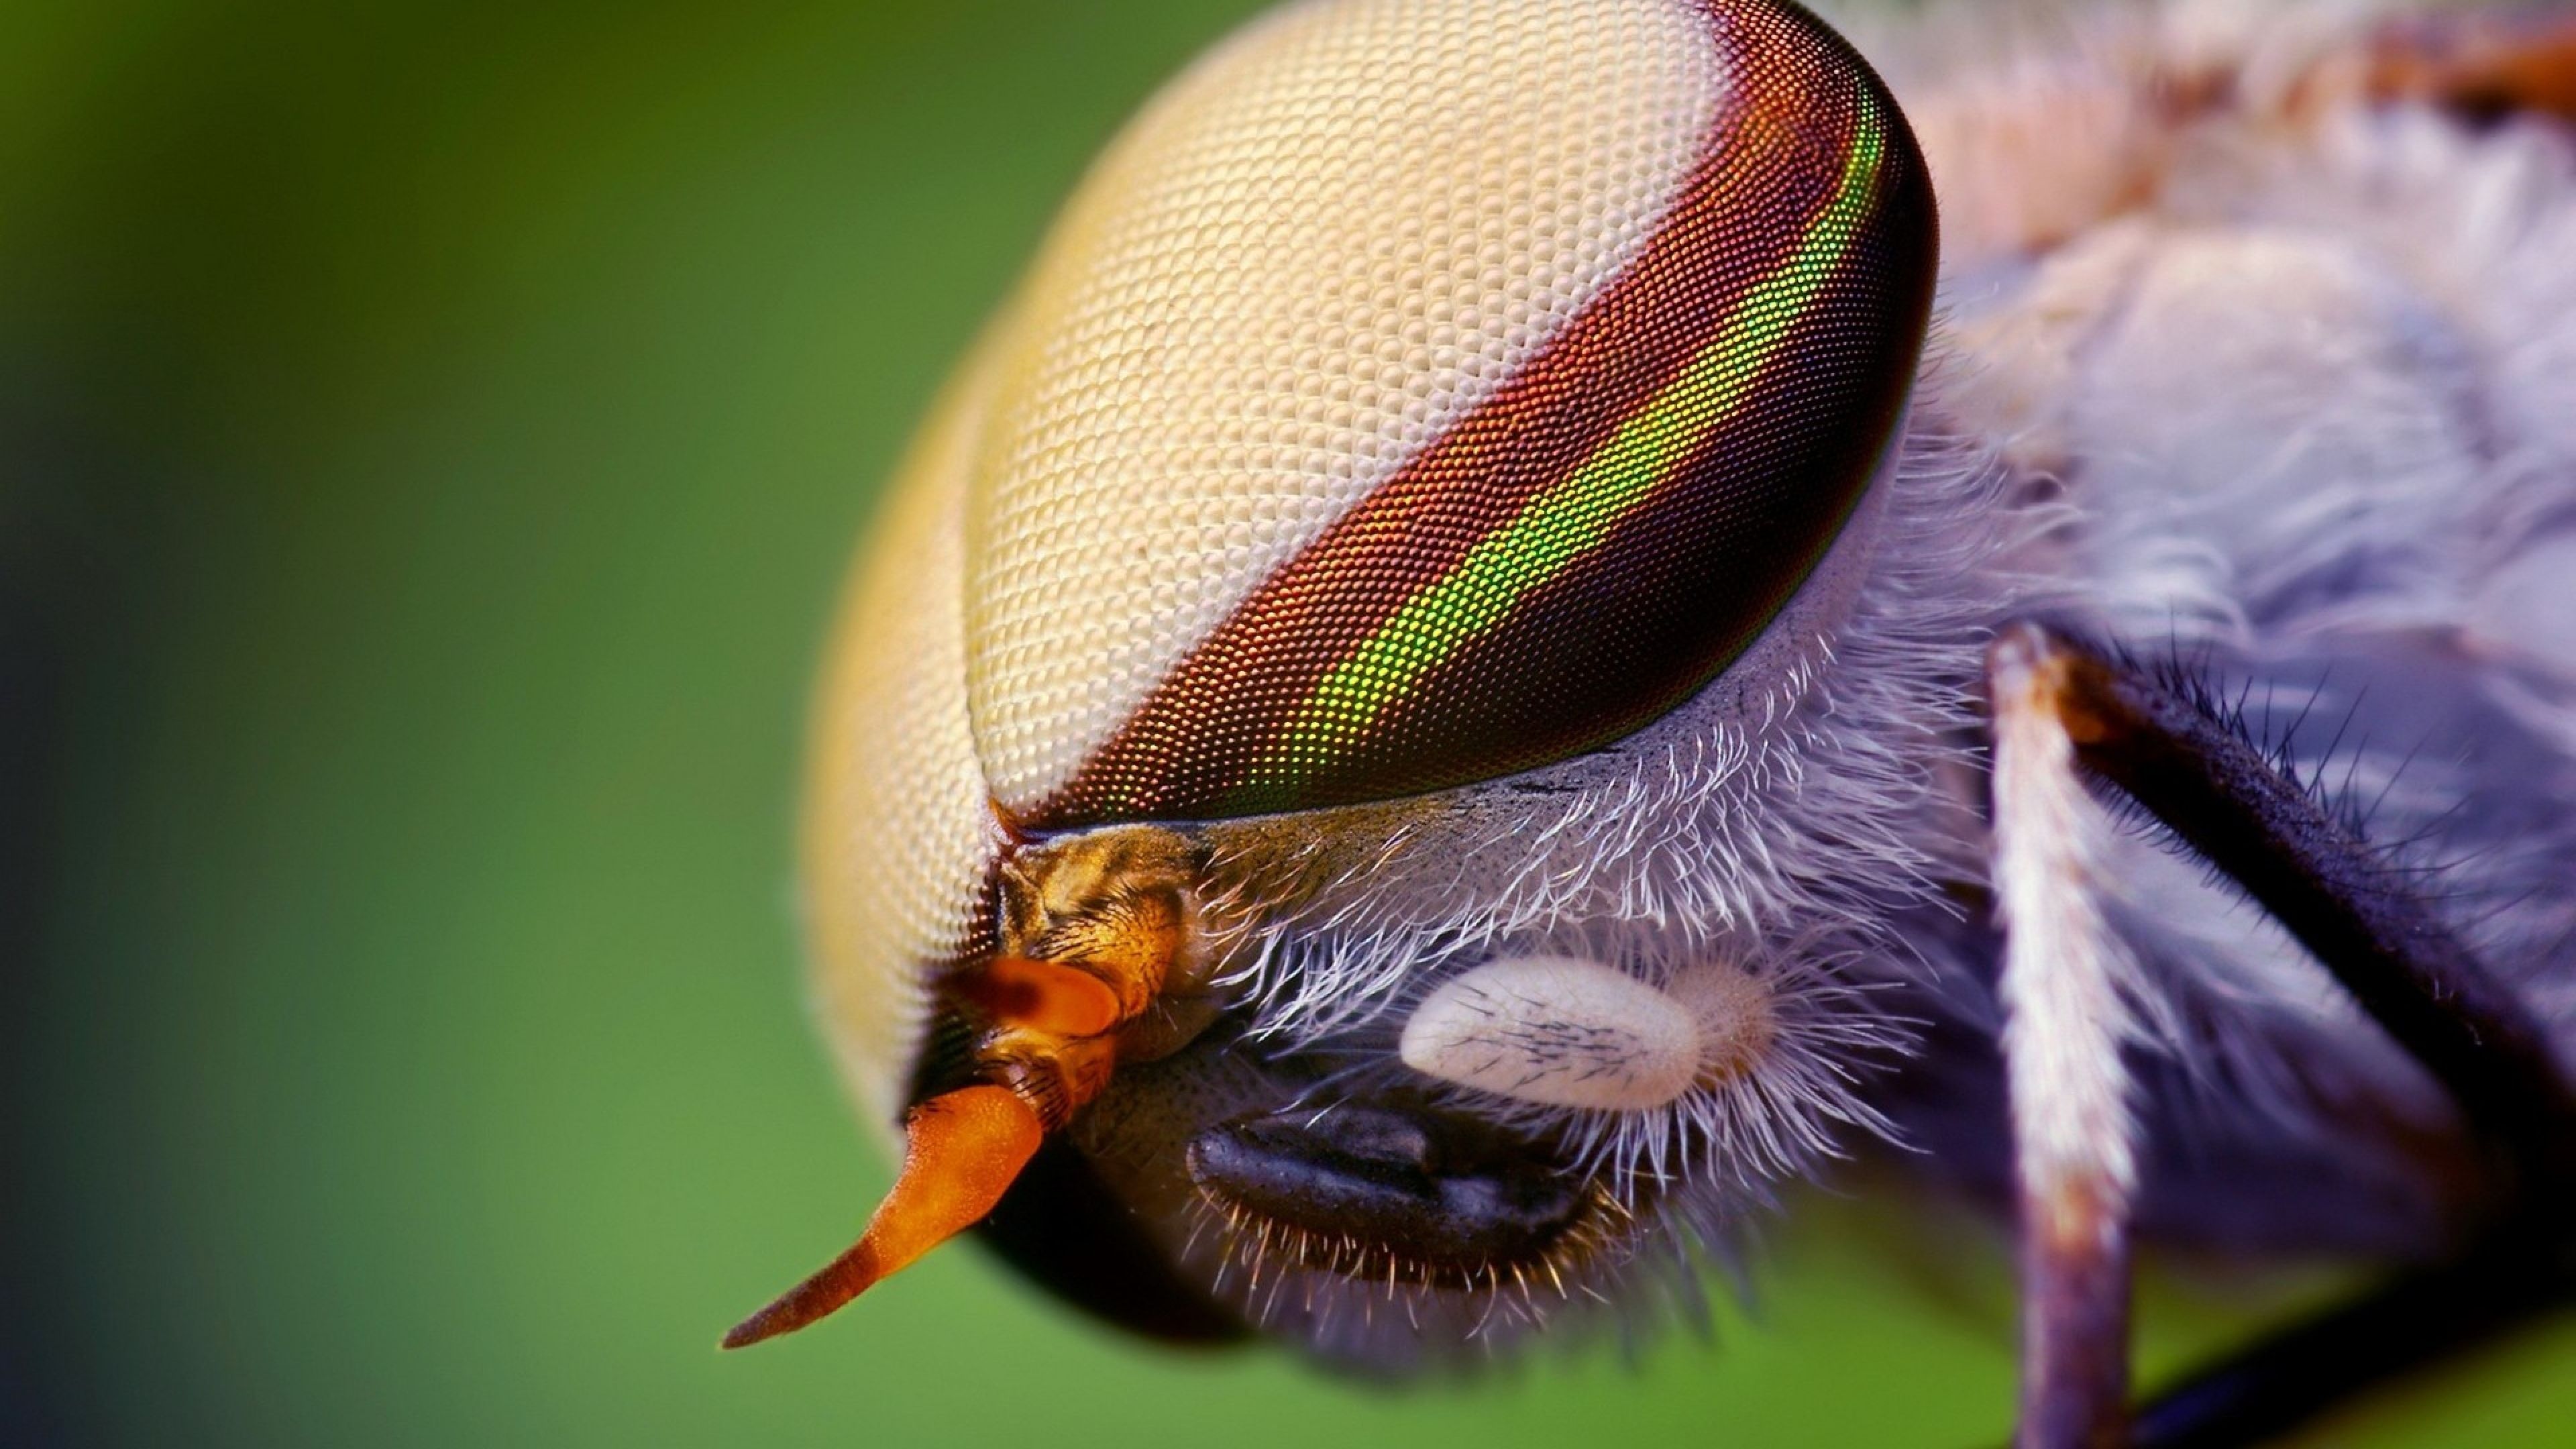 3840x2160 Wallpaper insect, head, eyes, close-up | The Woods ...